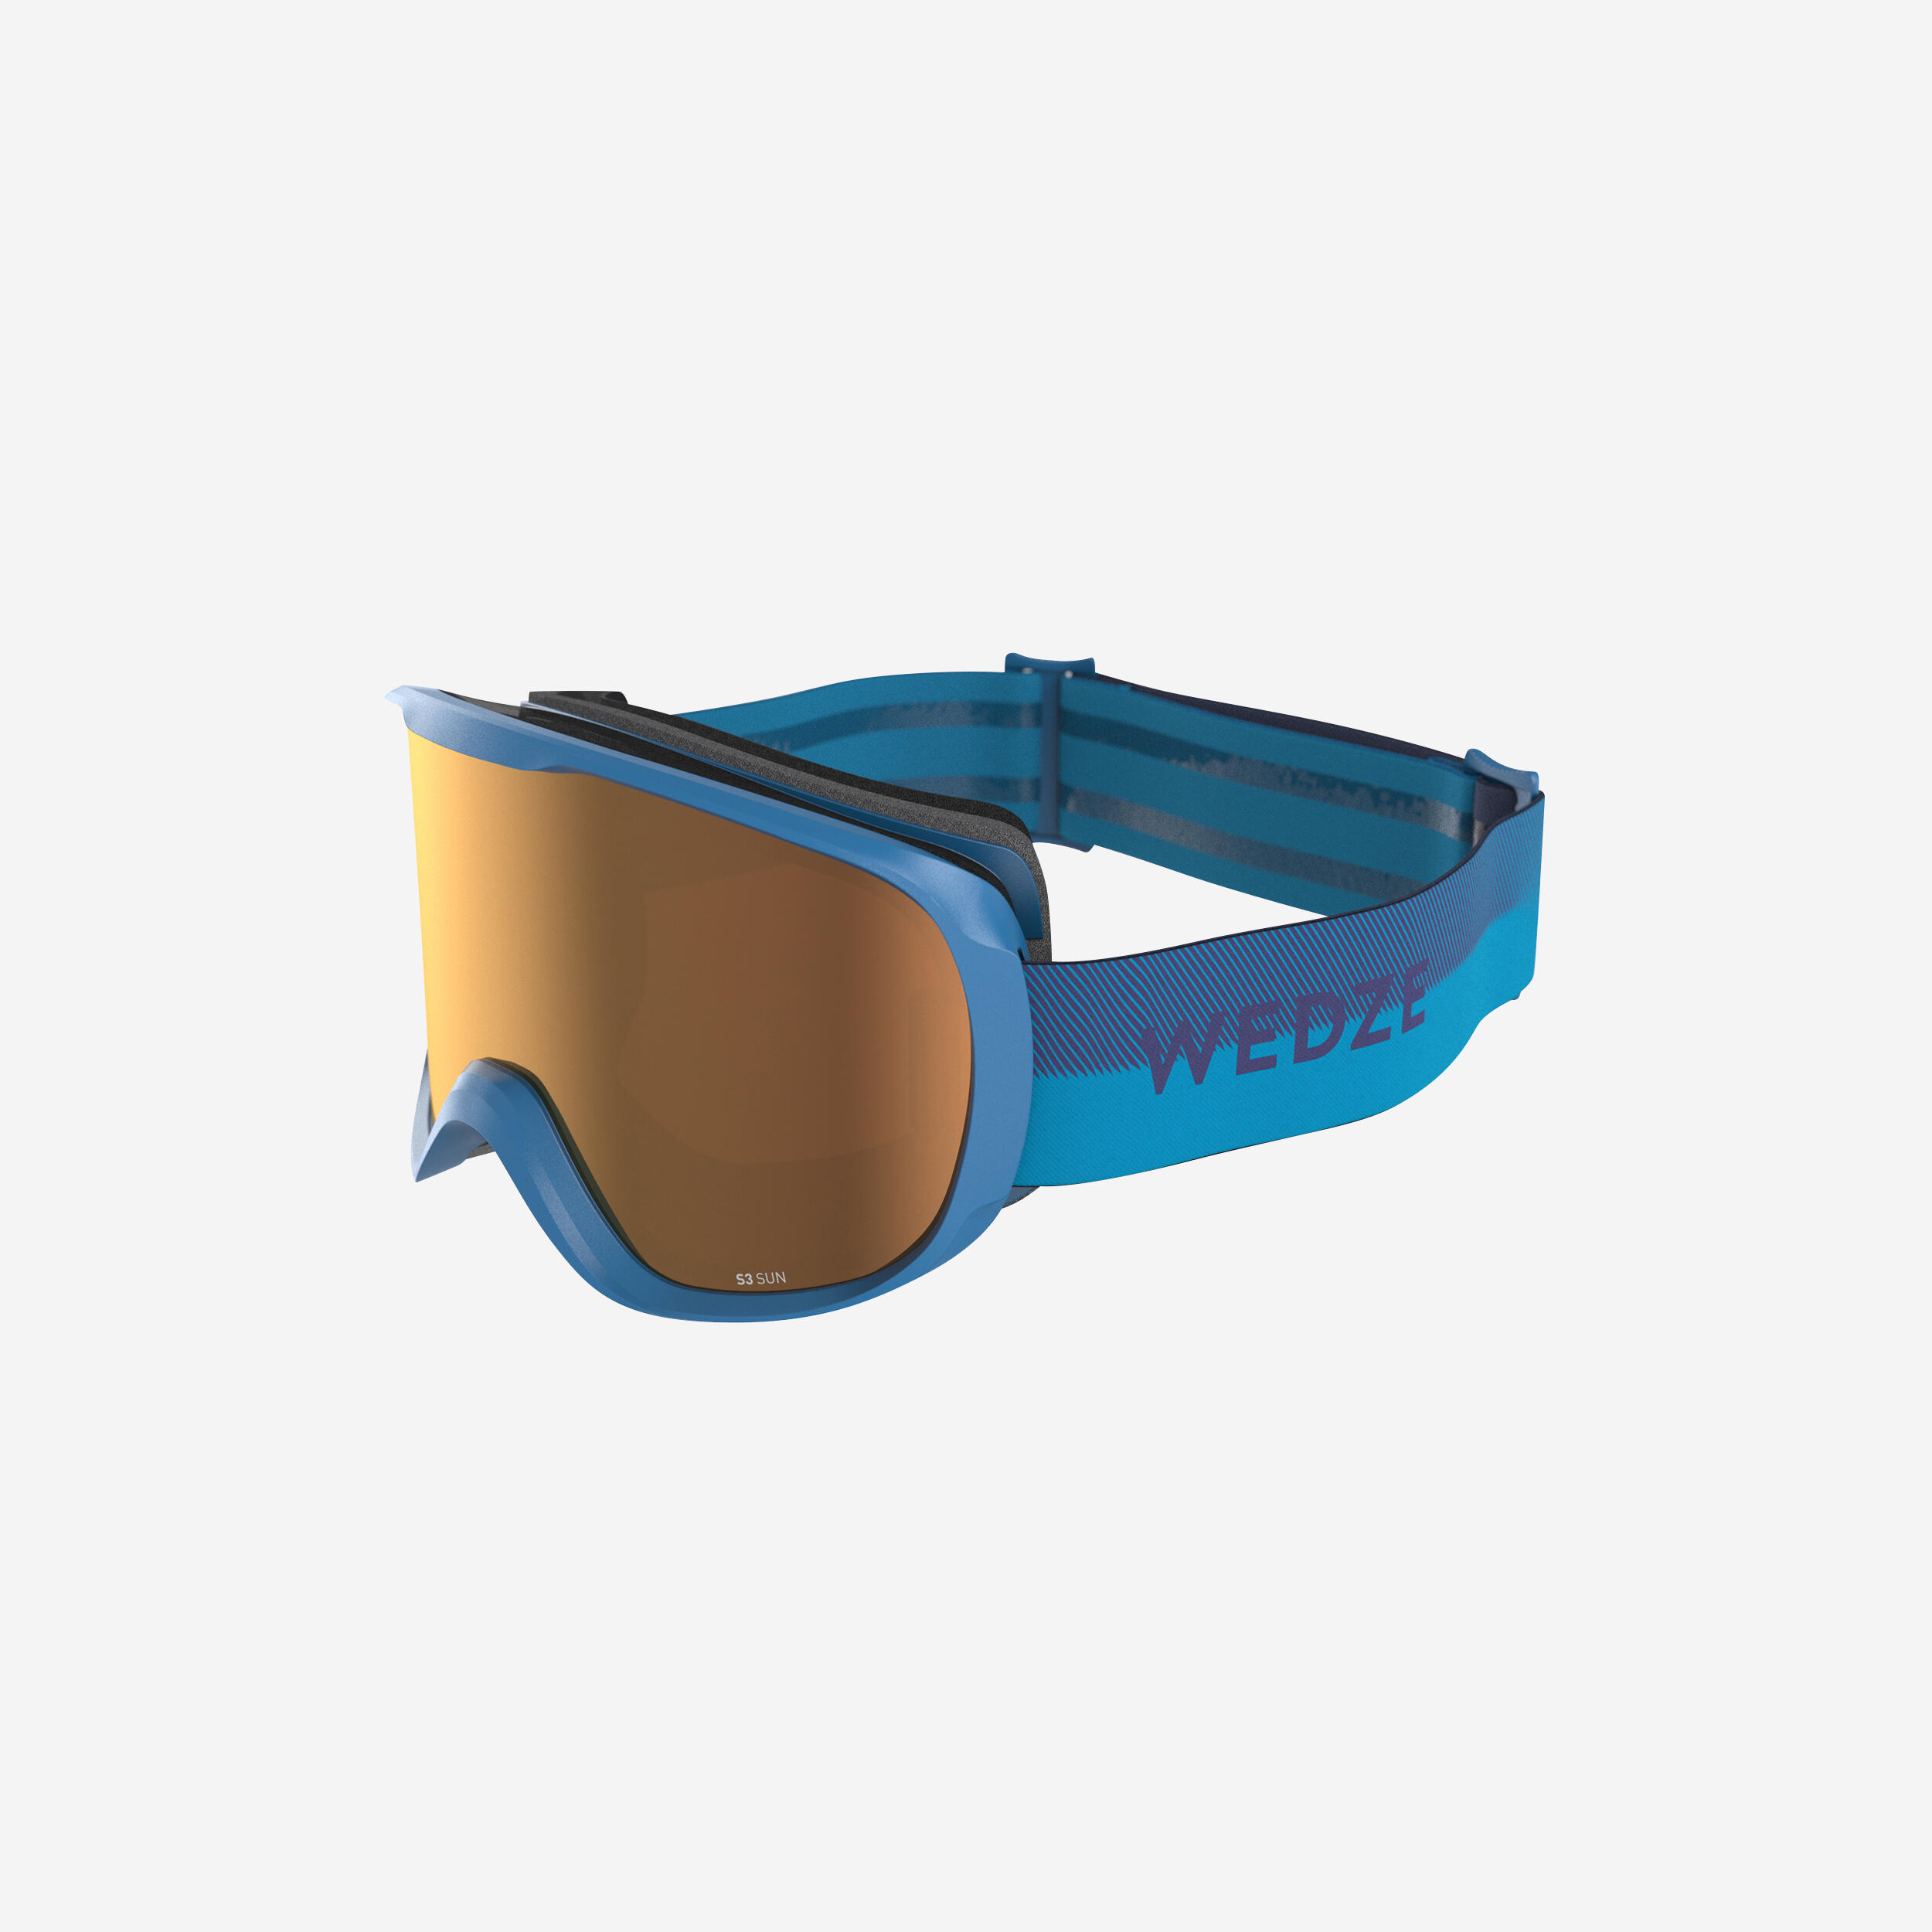 WEDZE KIDS’ AND ADULT’S GOOD WEATHER SKIING AND SNOWBOARDING GOGGLES - G 500 S3 - BLUE